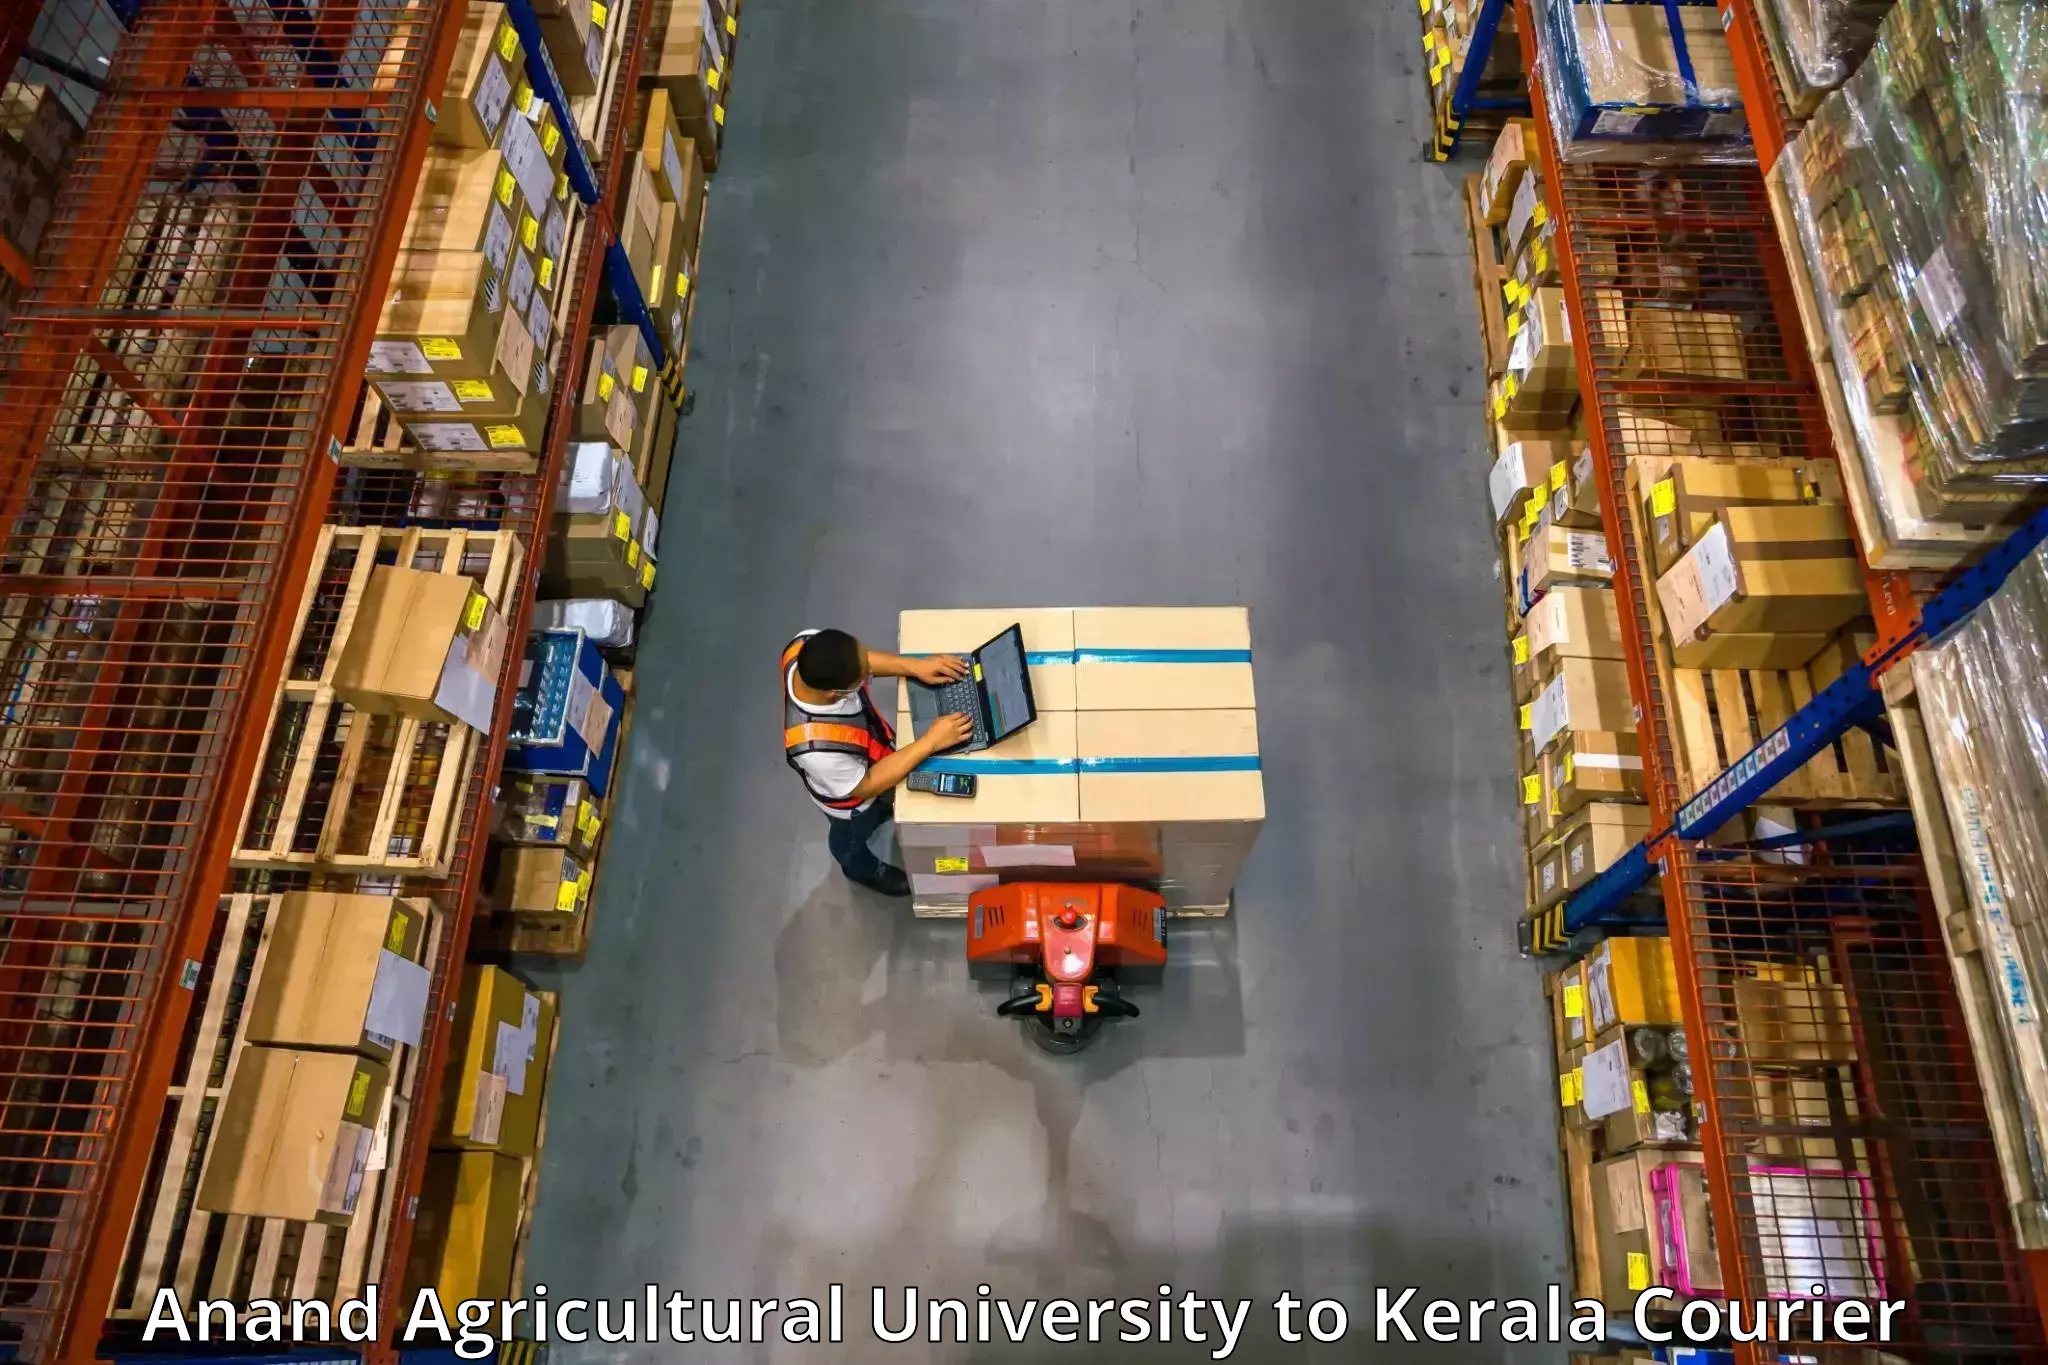 Furniture moving solutions Anand Agricultural University to Kerala